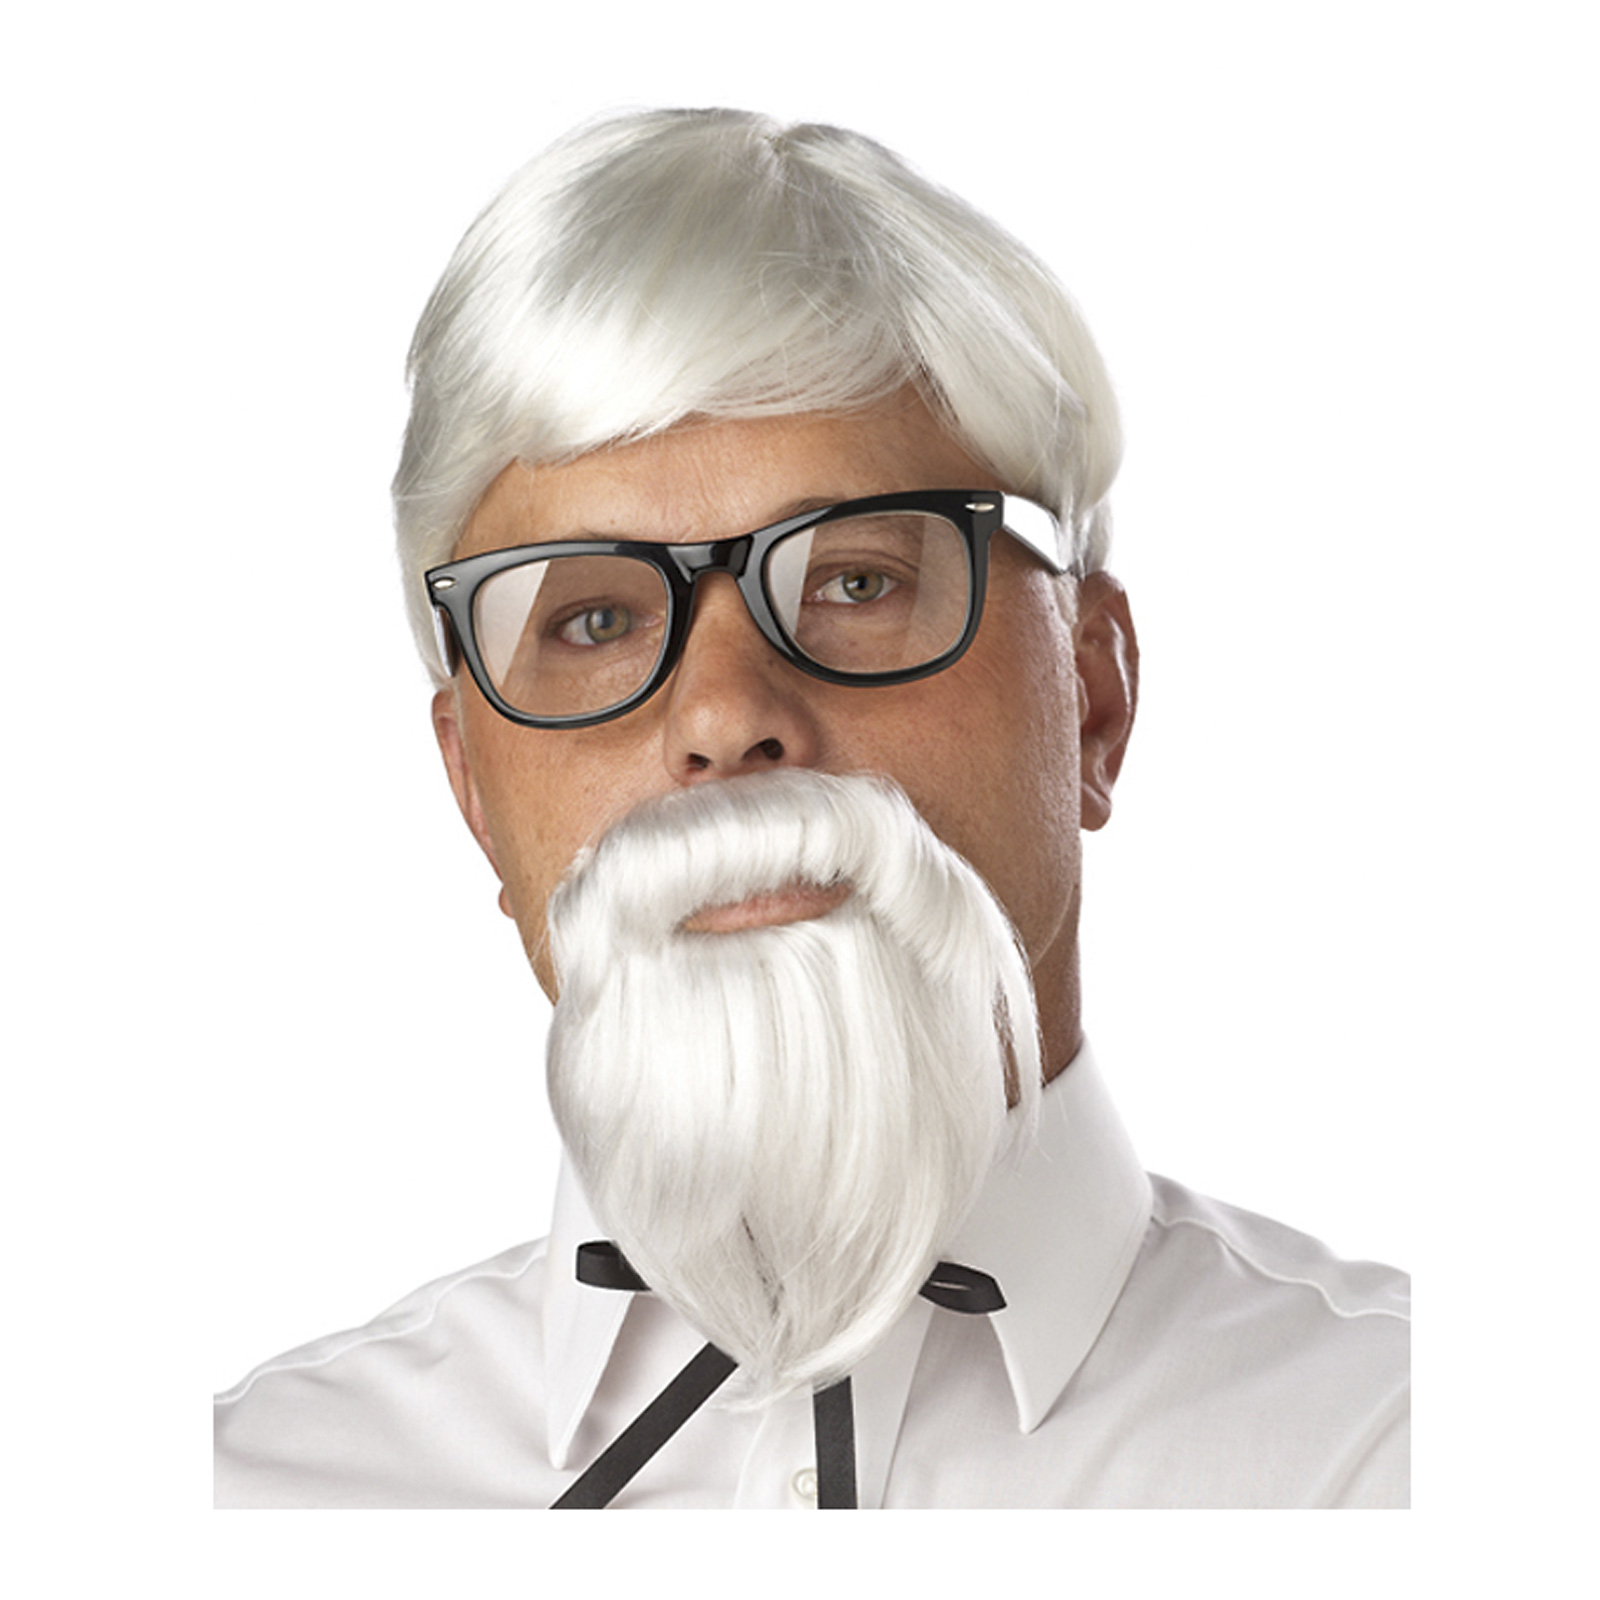 The Colonel Sanders Southern Man White Wig and Beard